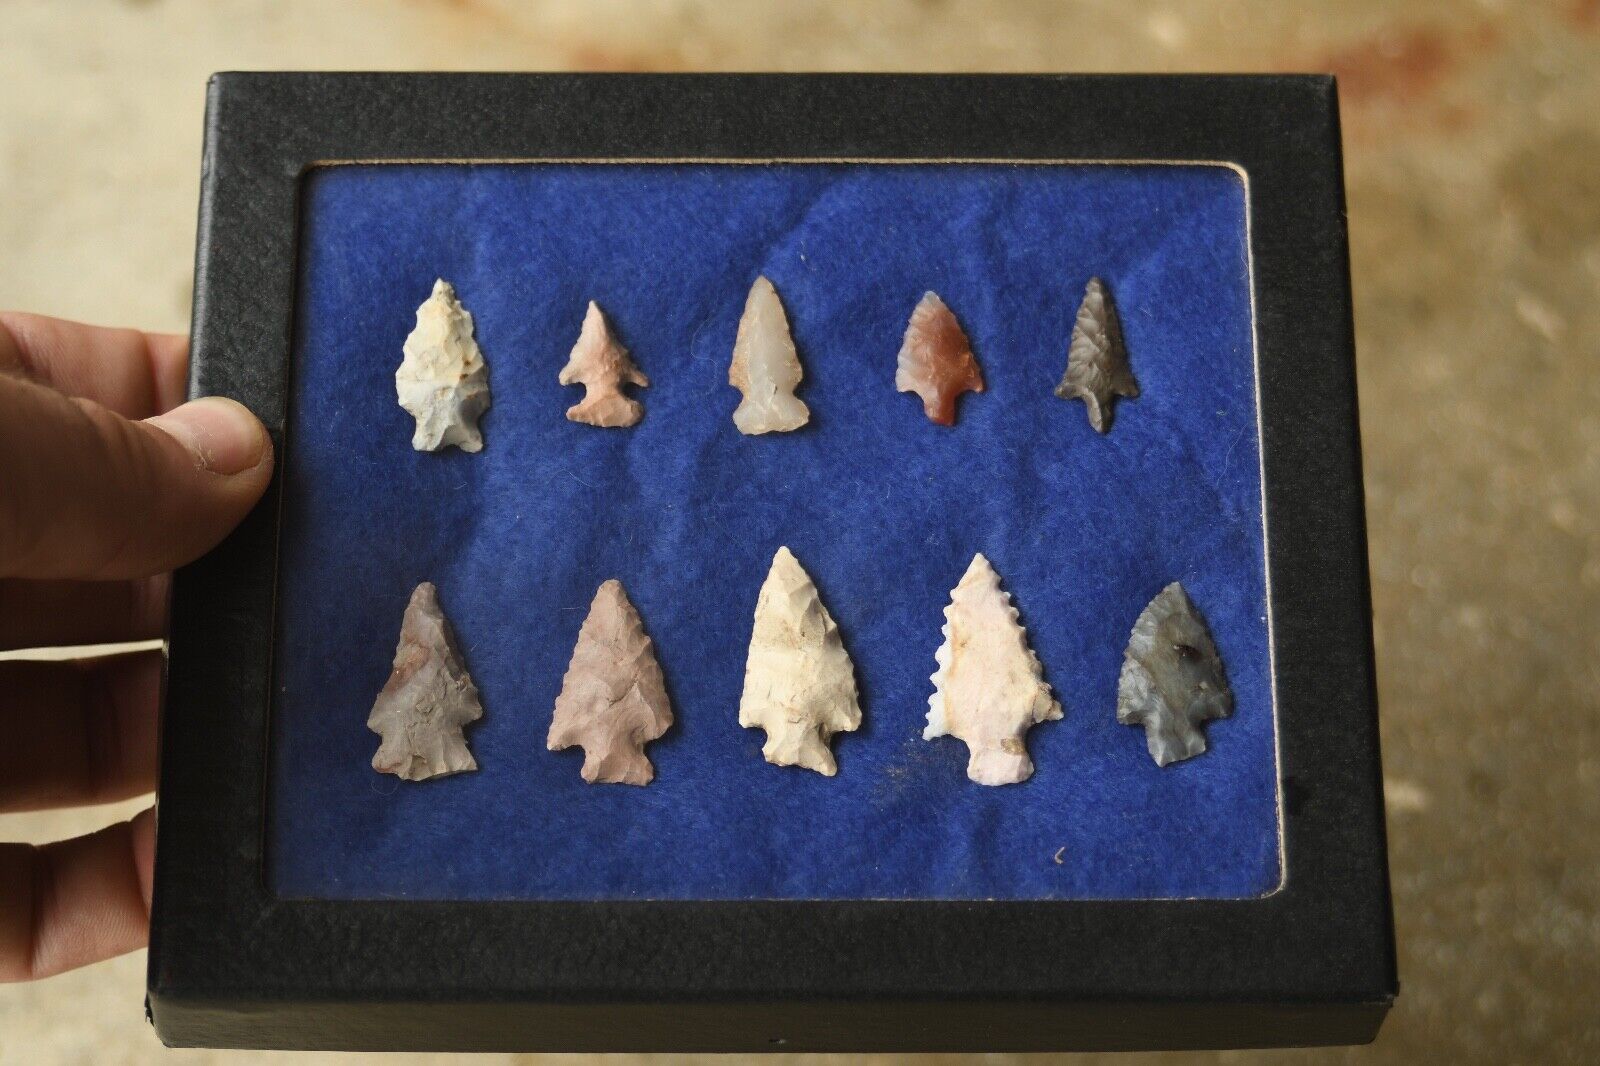 5x6 case of 10 Native American Bird points/ arrowheads from the midwest